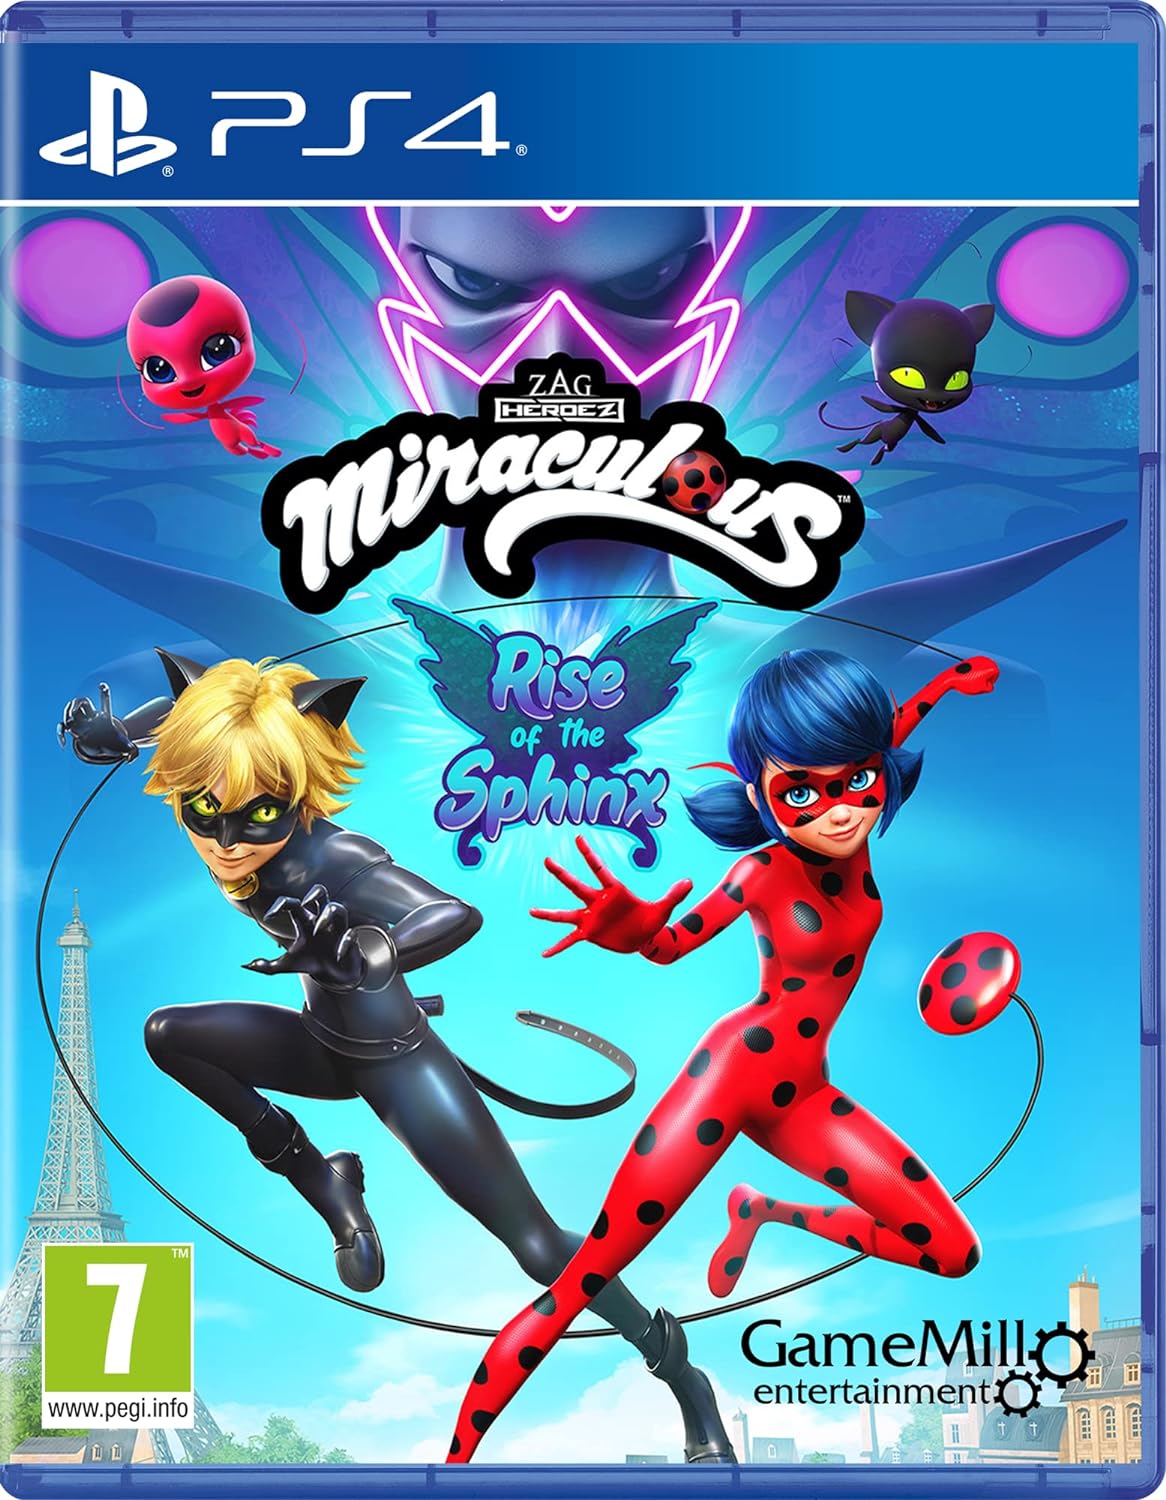 Miraculous: Rise of the Sphinx - PS4 - 7